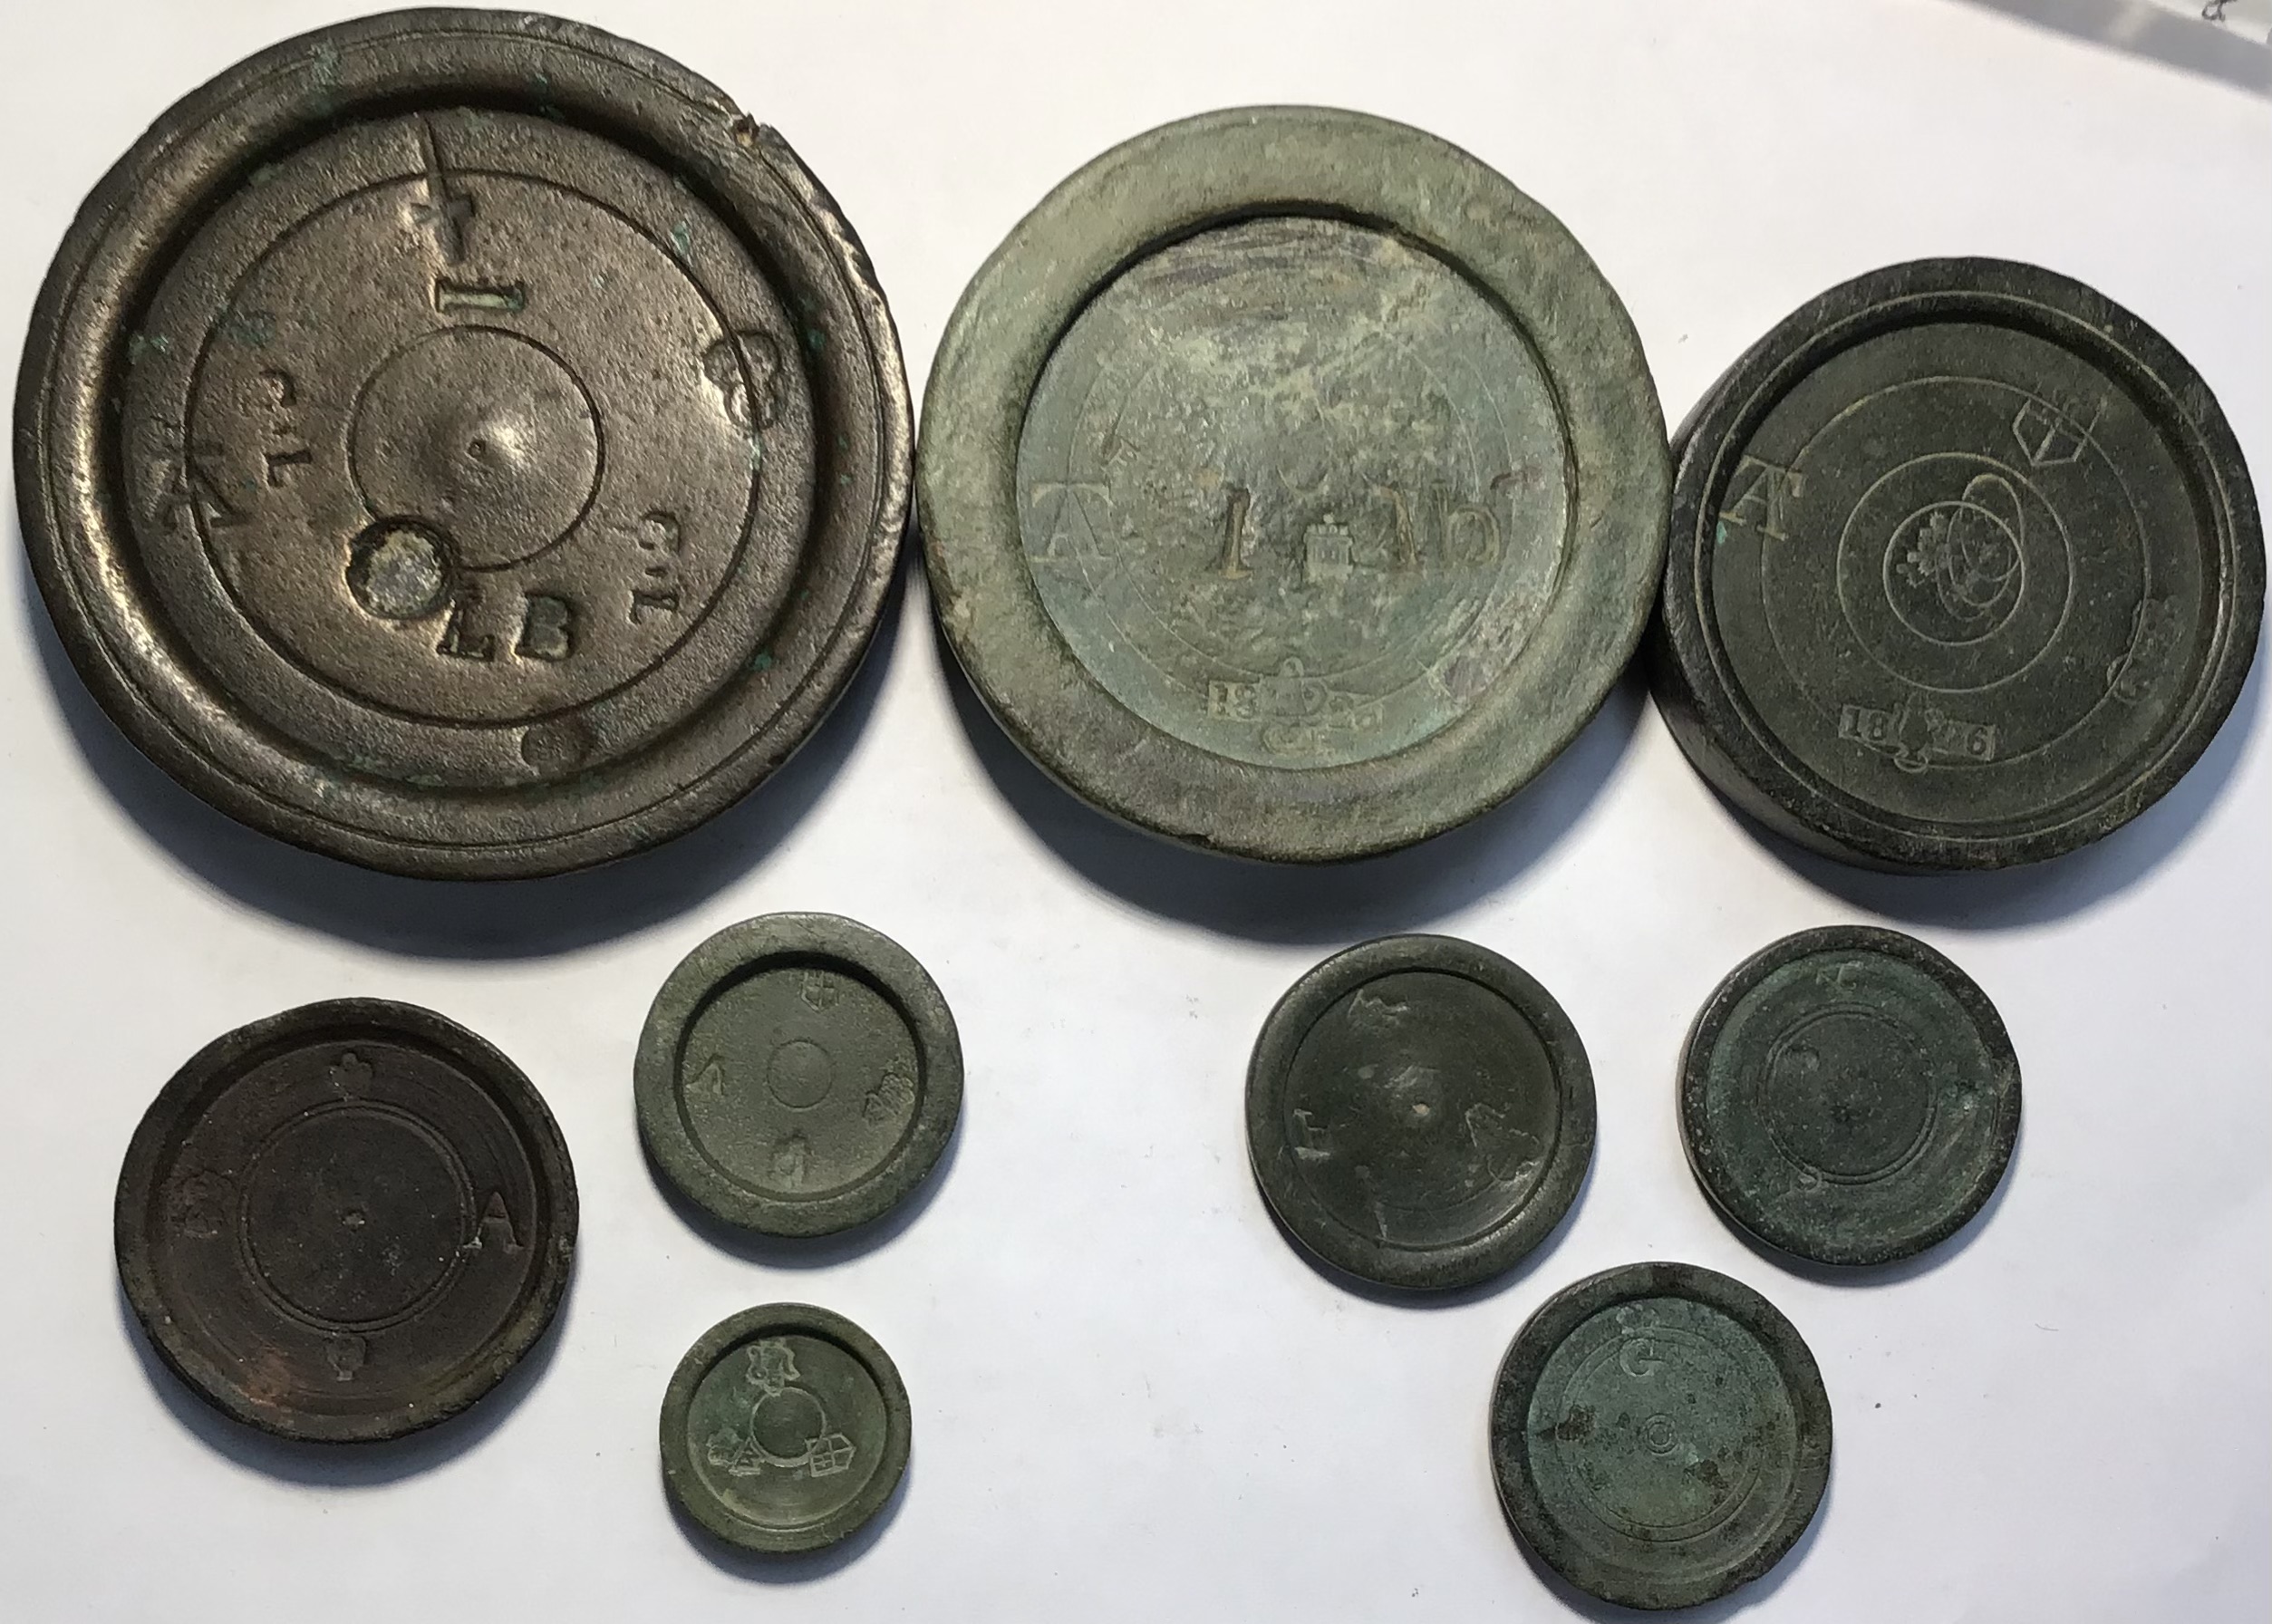 Collection of Trade weights. ½lb avoirdupois bronze trade weight dated 1826 (George IV). Stamped